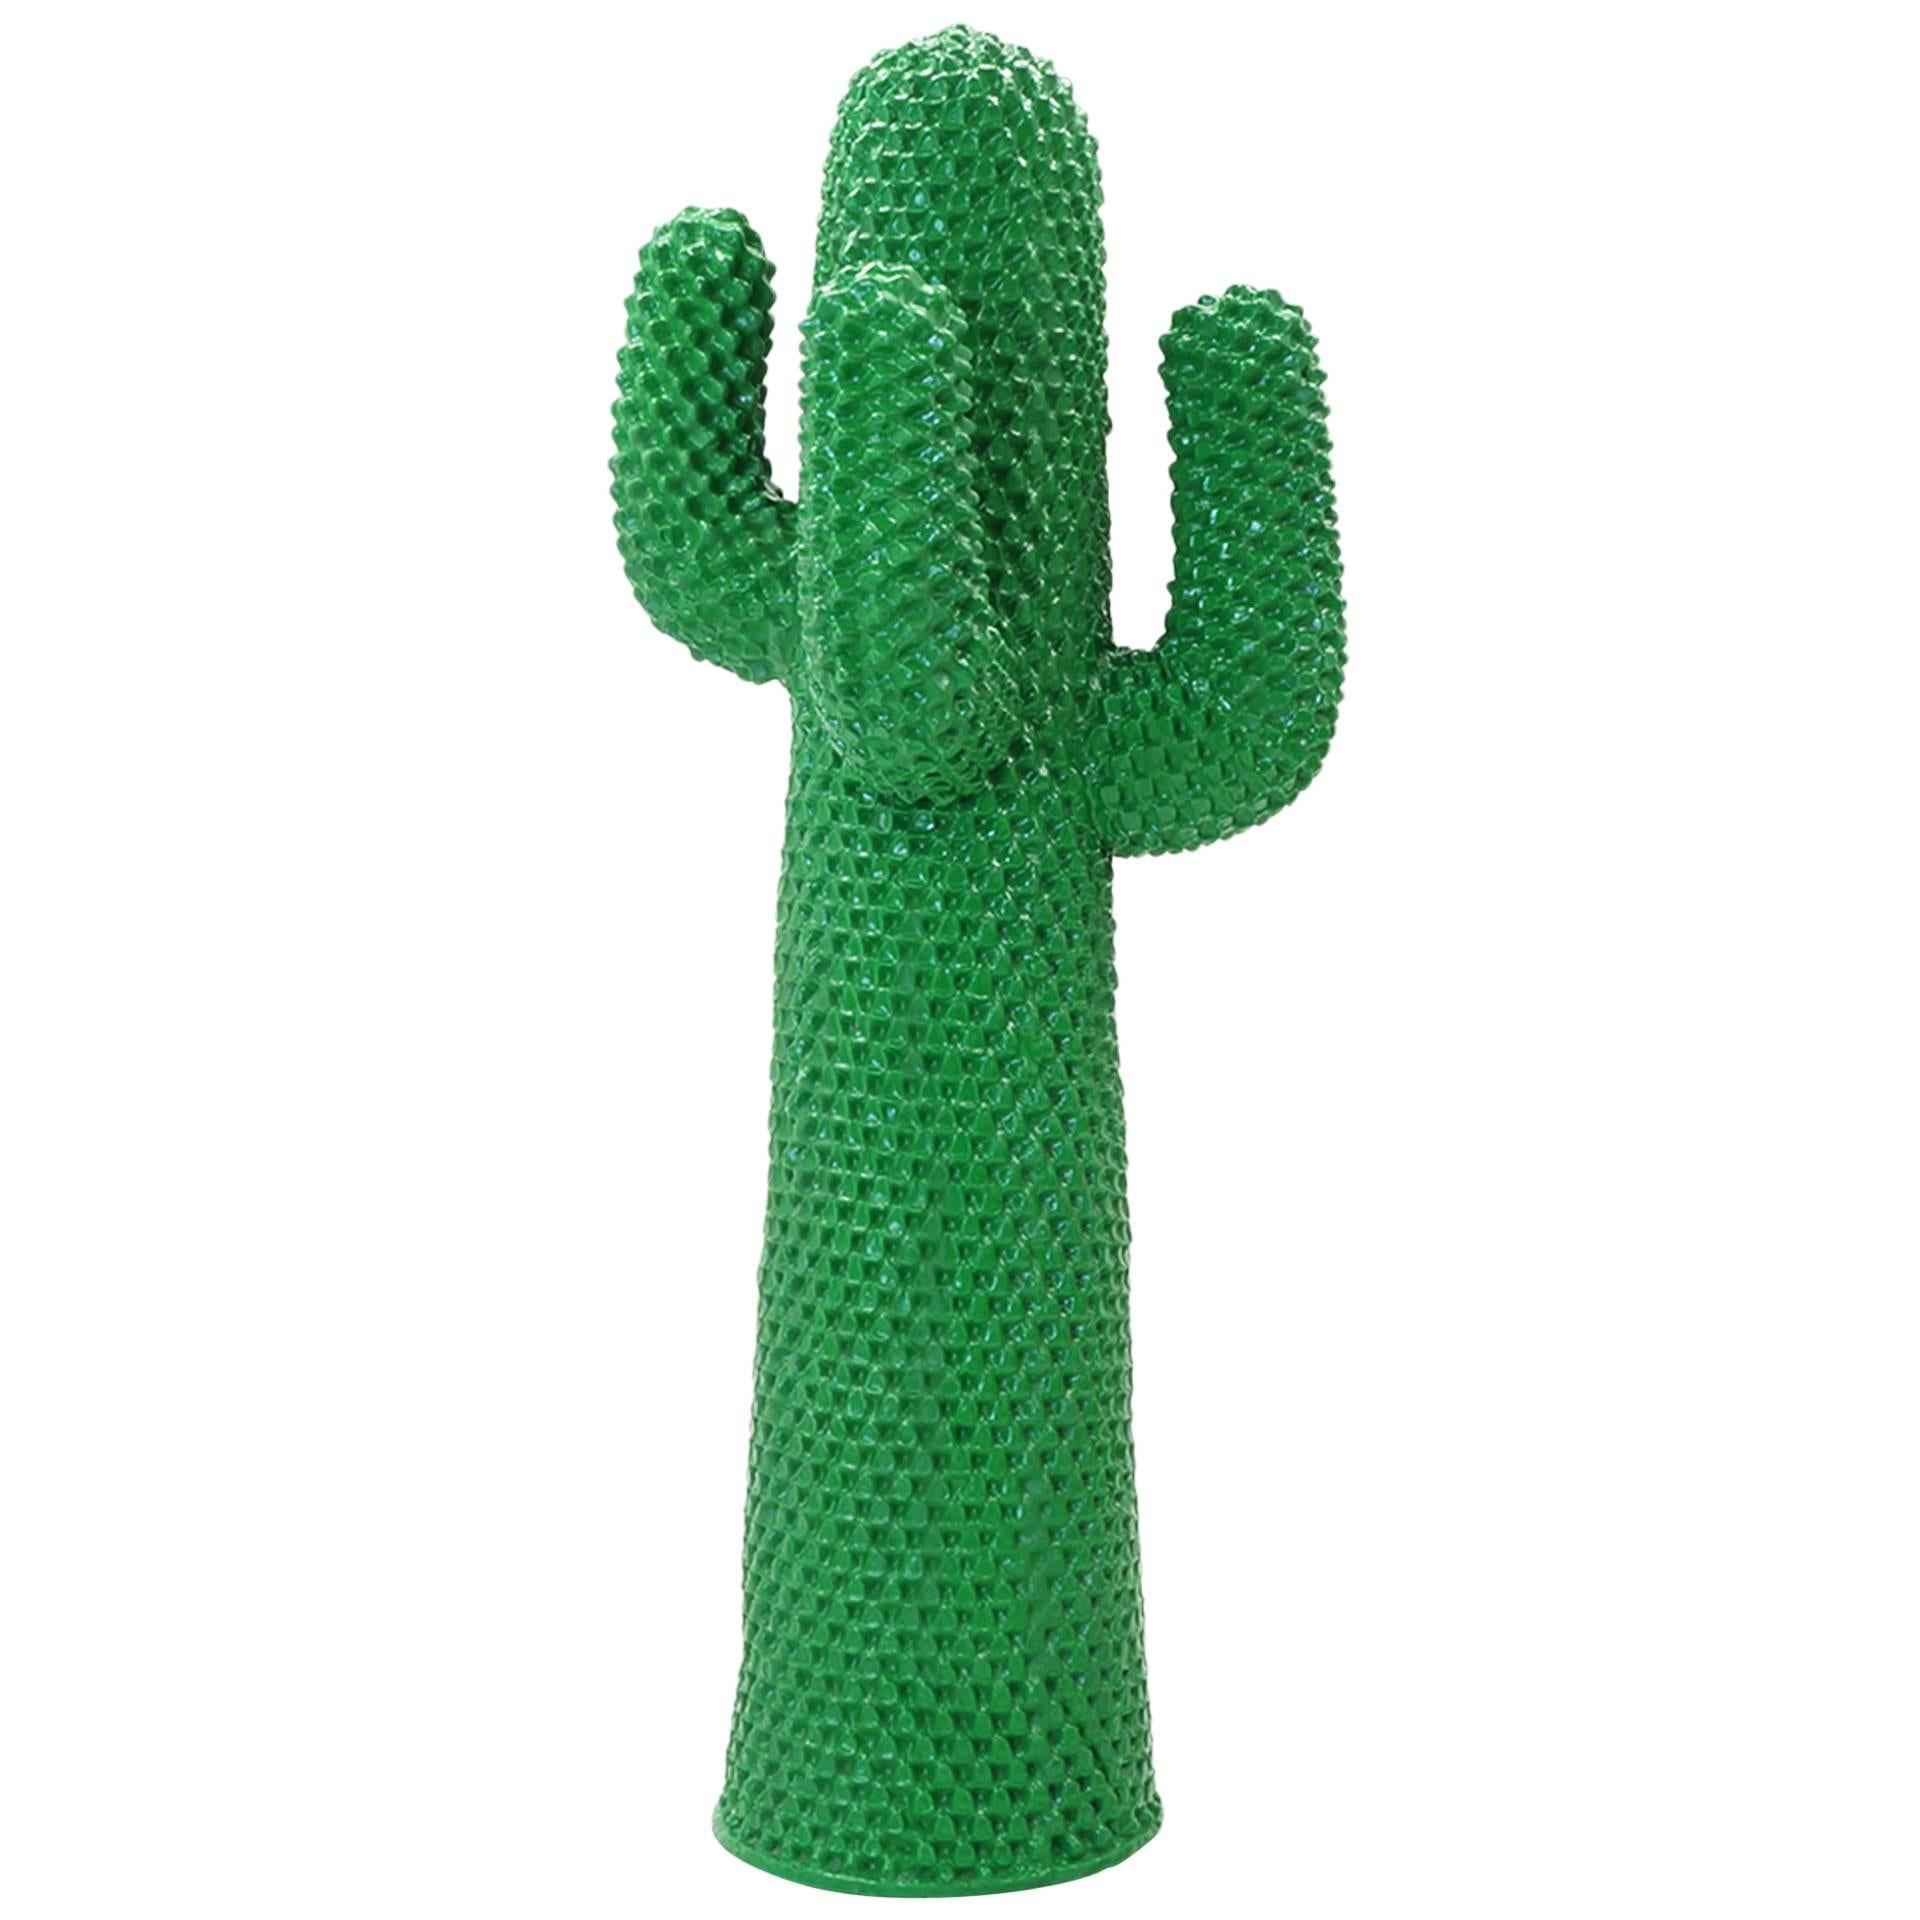 Cactus Coat Rack / Hall Tree by Guido Drocco and Franco Mello for Gufram